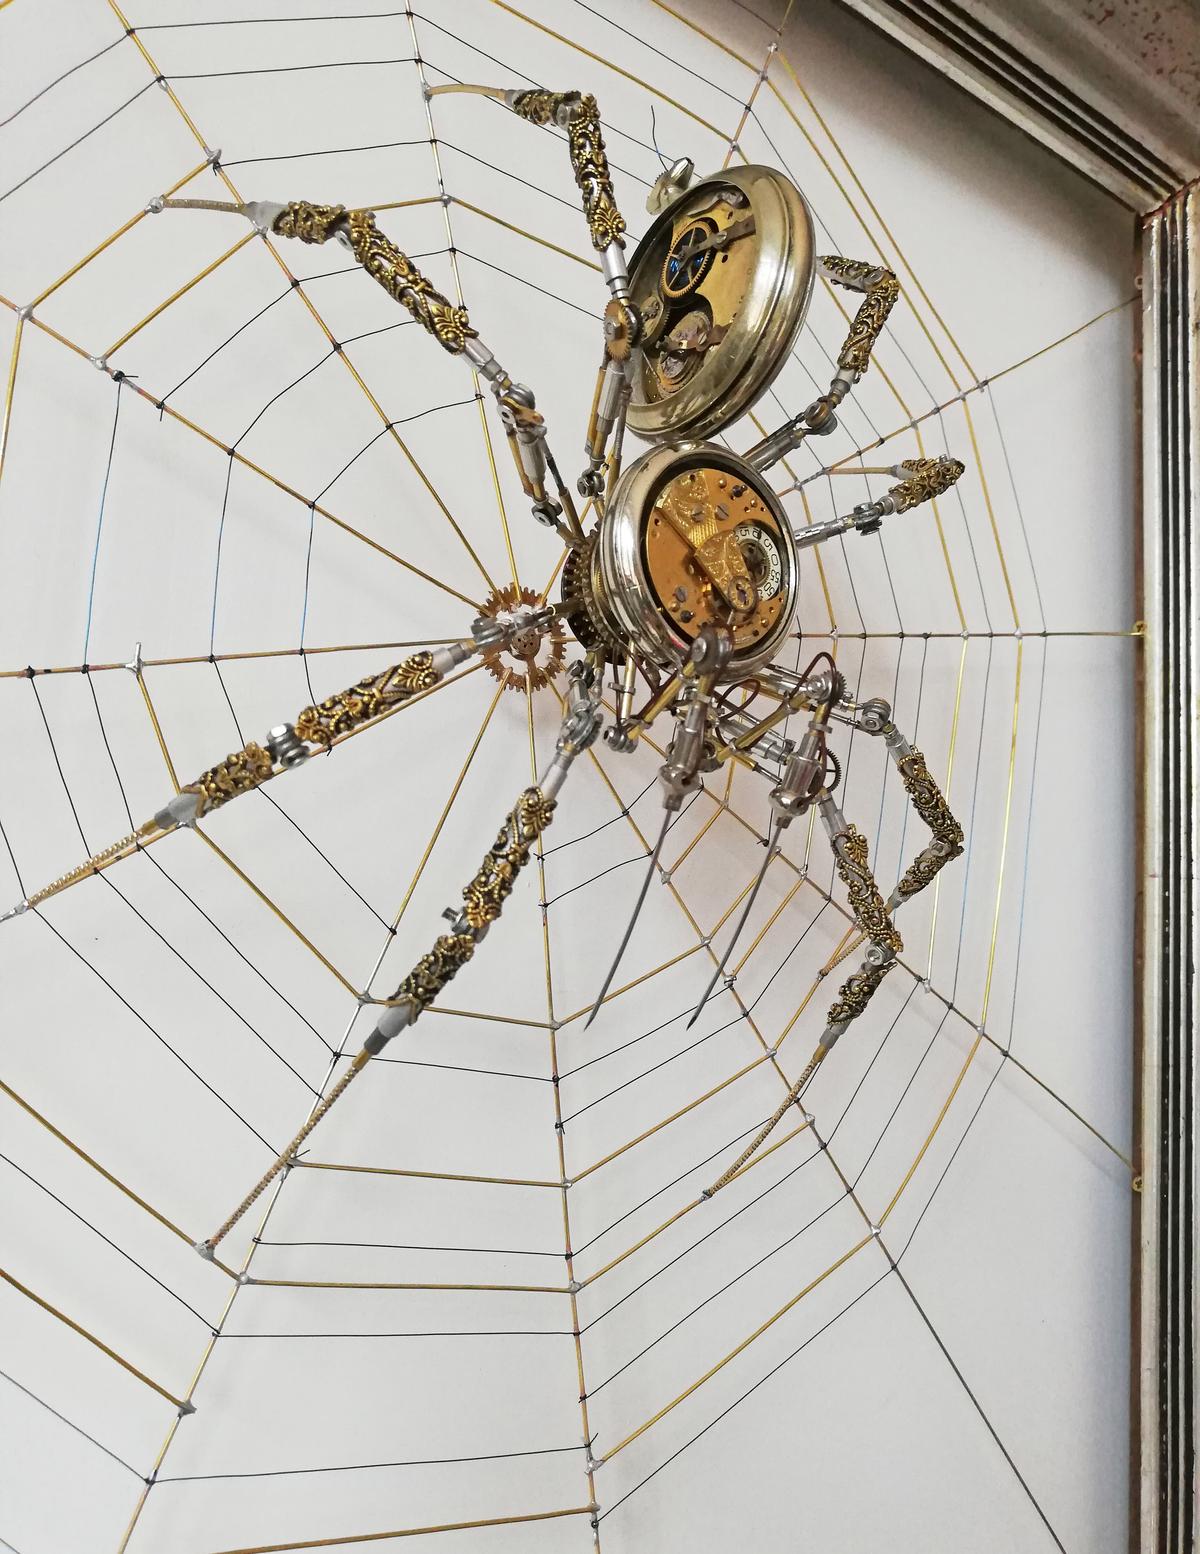 Yet another steampunk spider (Caters News)